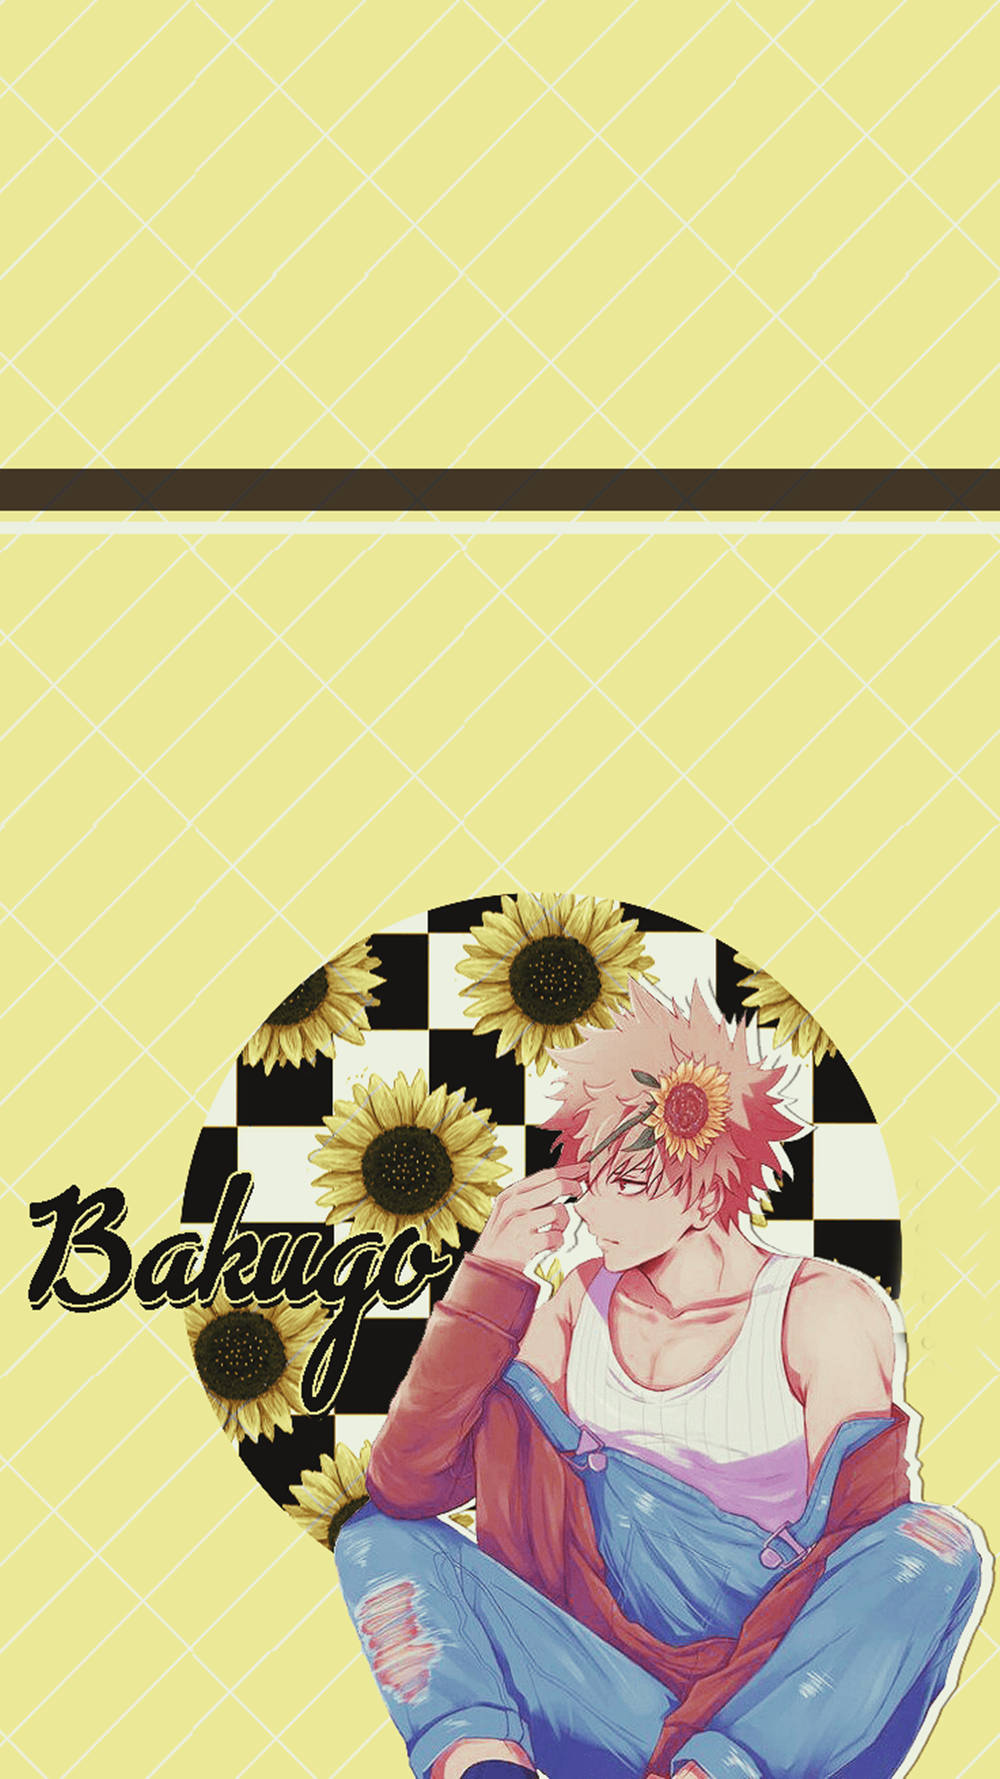 Life Is Too Short To Be Serious All The Time – Cute Bakugou Wallpaper